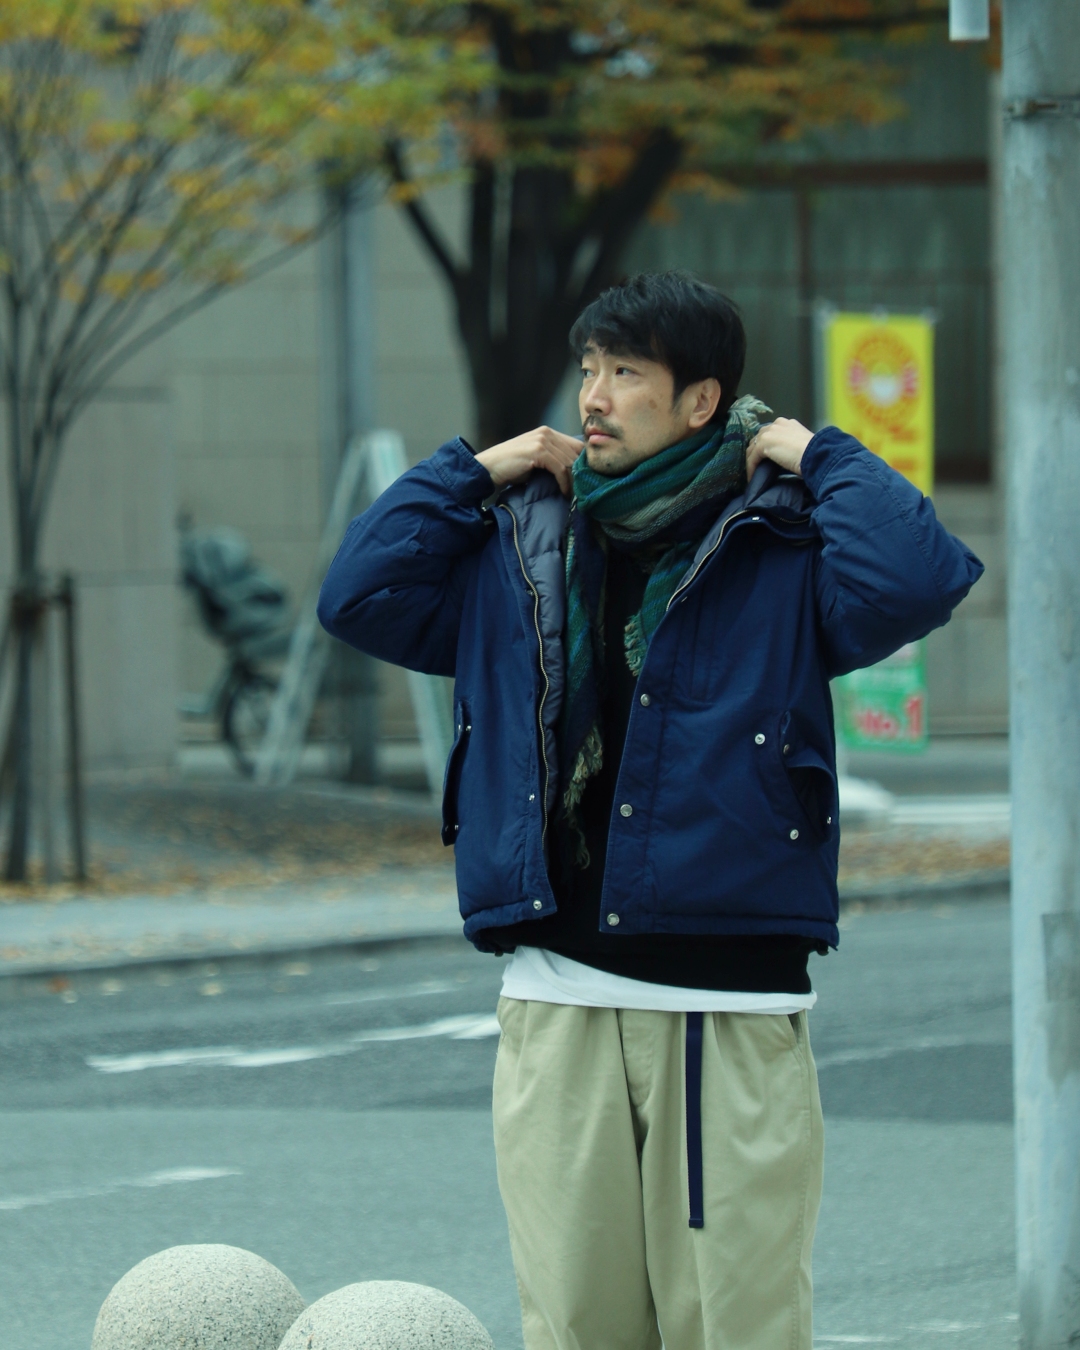 【THE NORTH FACE PPL】MOUNTAIN SHORT DOWNレディース